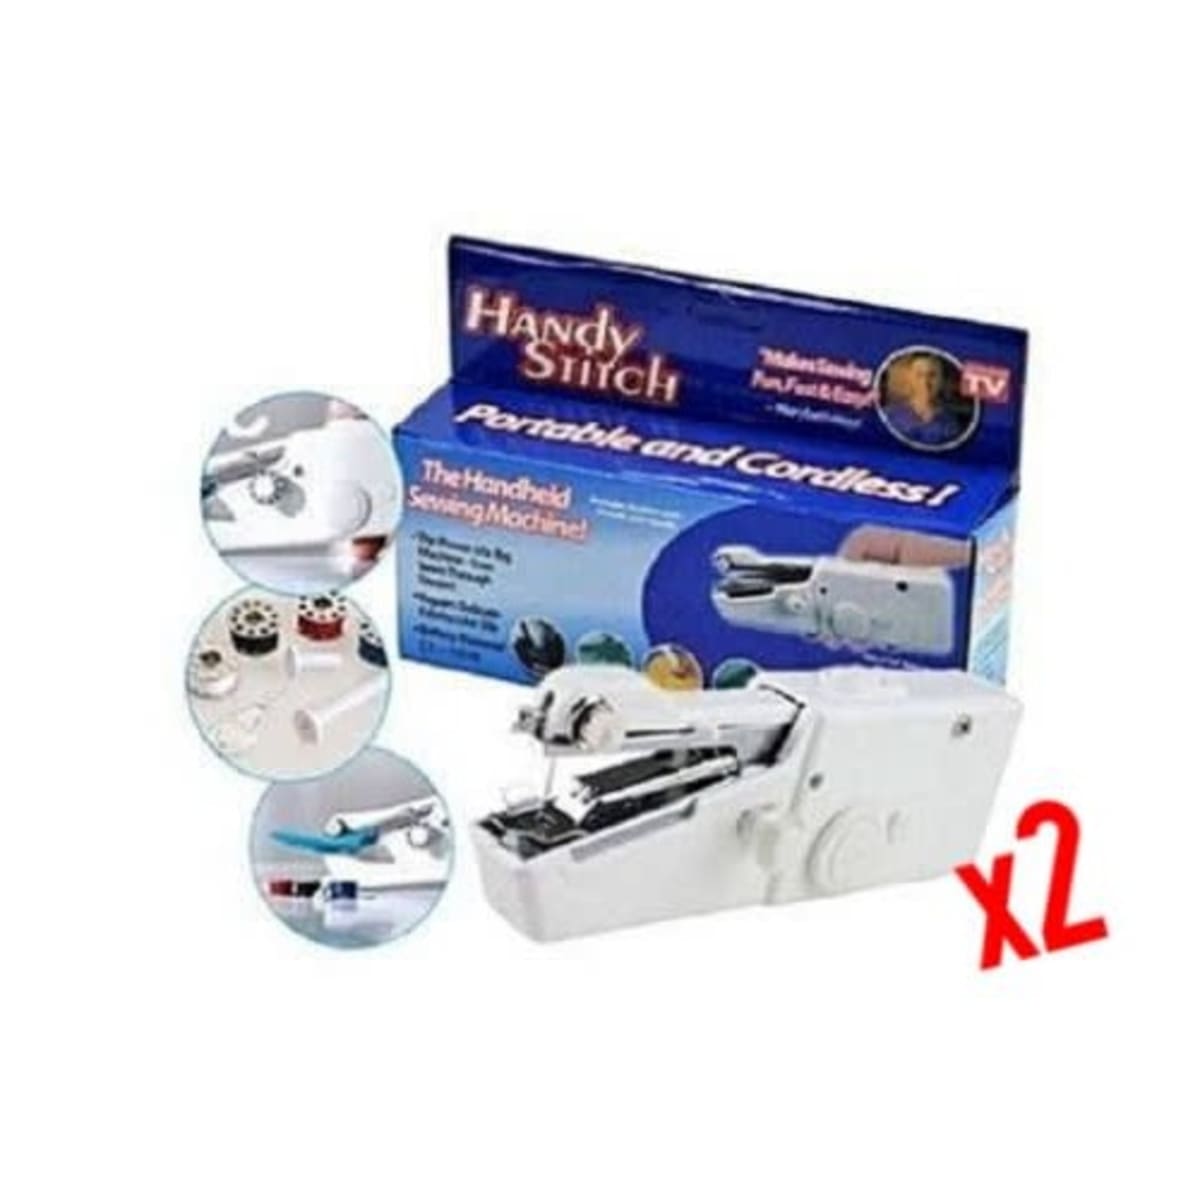 Sewing Machine, Hand Sewing Machines, Hand Held Sewing Machine for